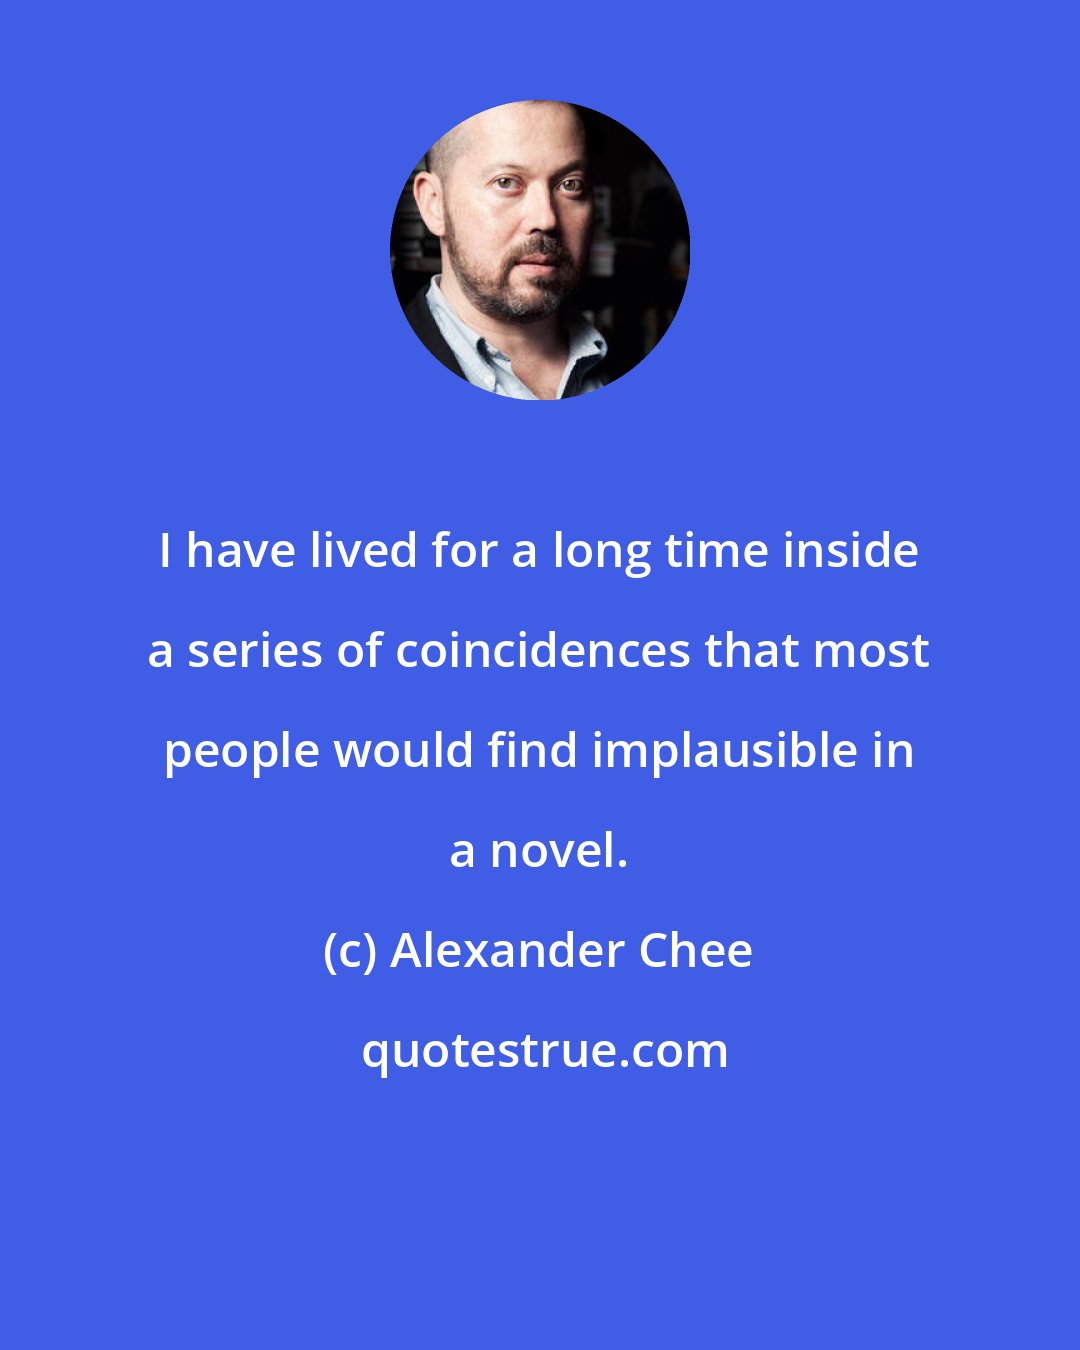 Alexander Chee: I have lived for a long time inside a series of coincidences that most people would find implausible in a novel.